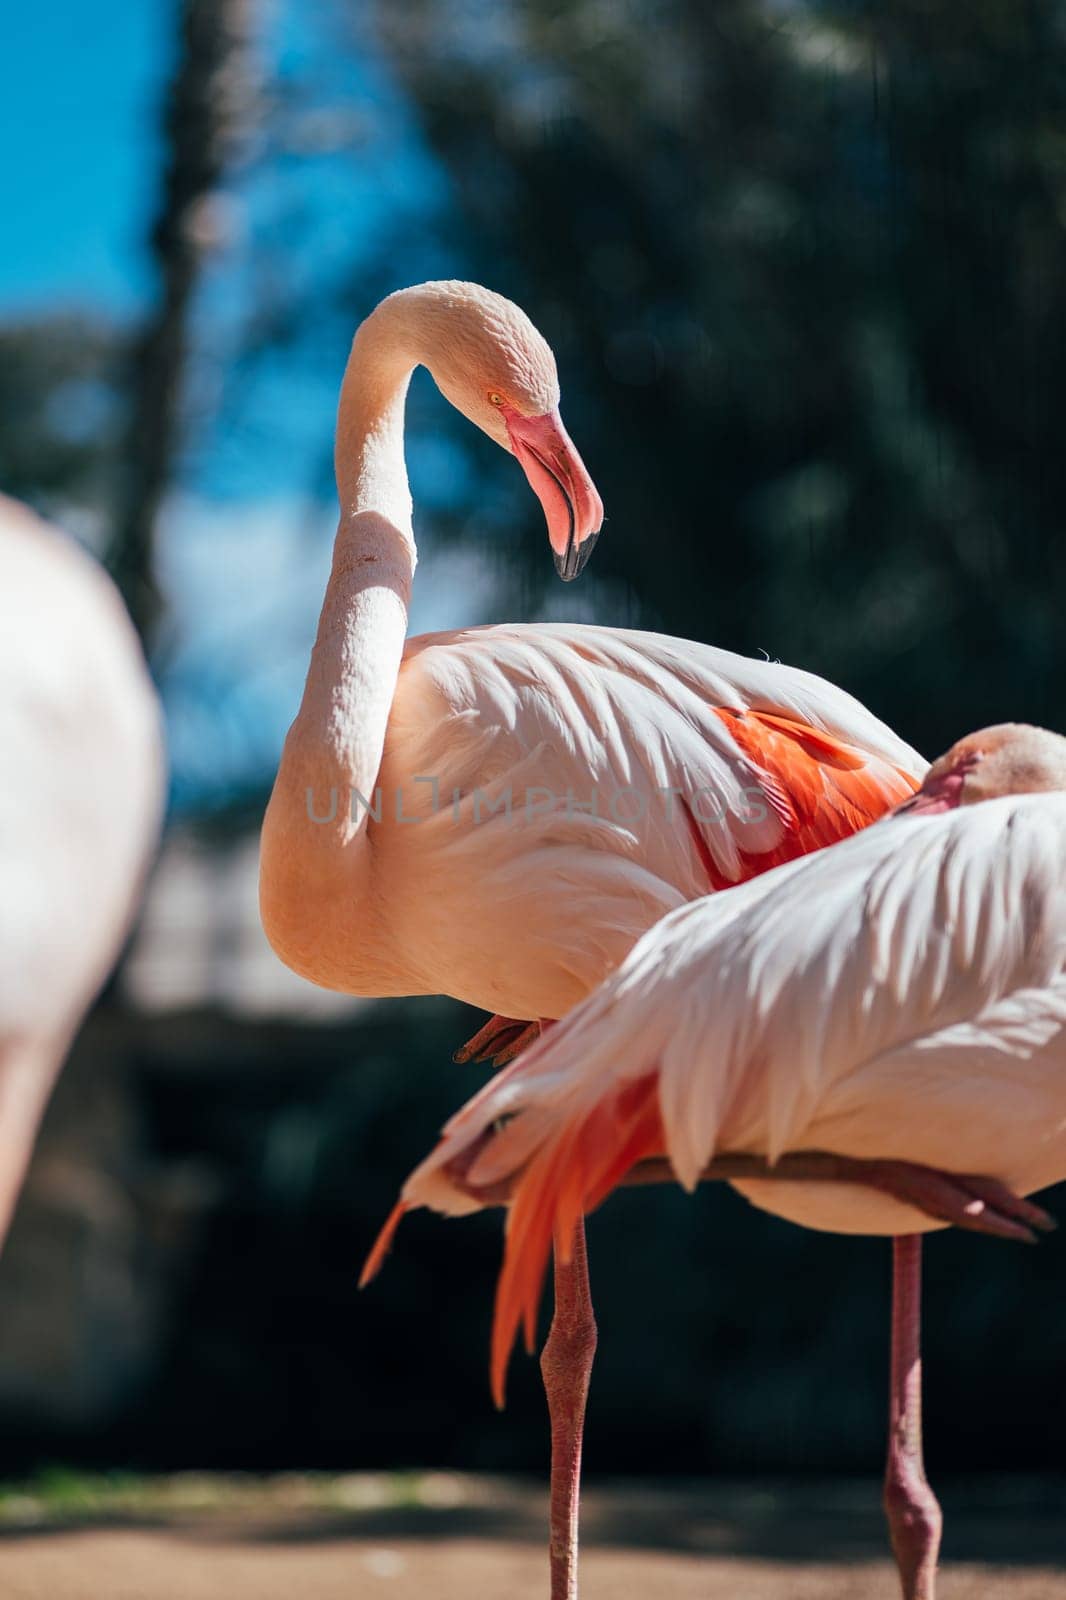 Pink Flamingo in the Wild: a Majestic Water Bird with a Striking Beak by apavlin